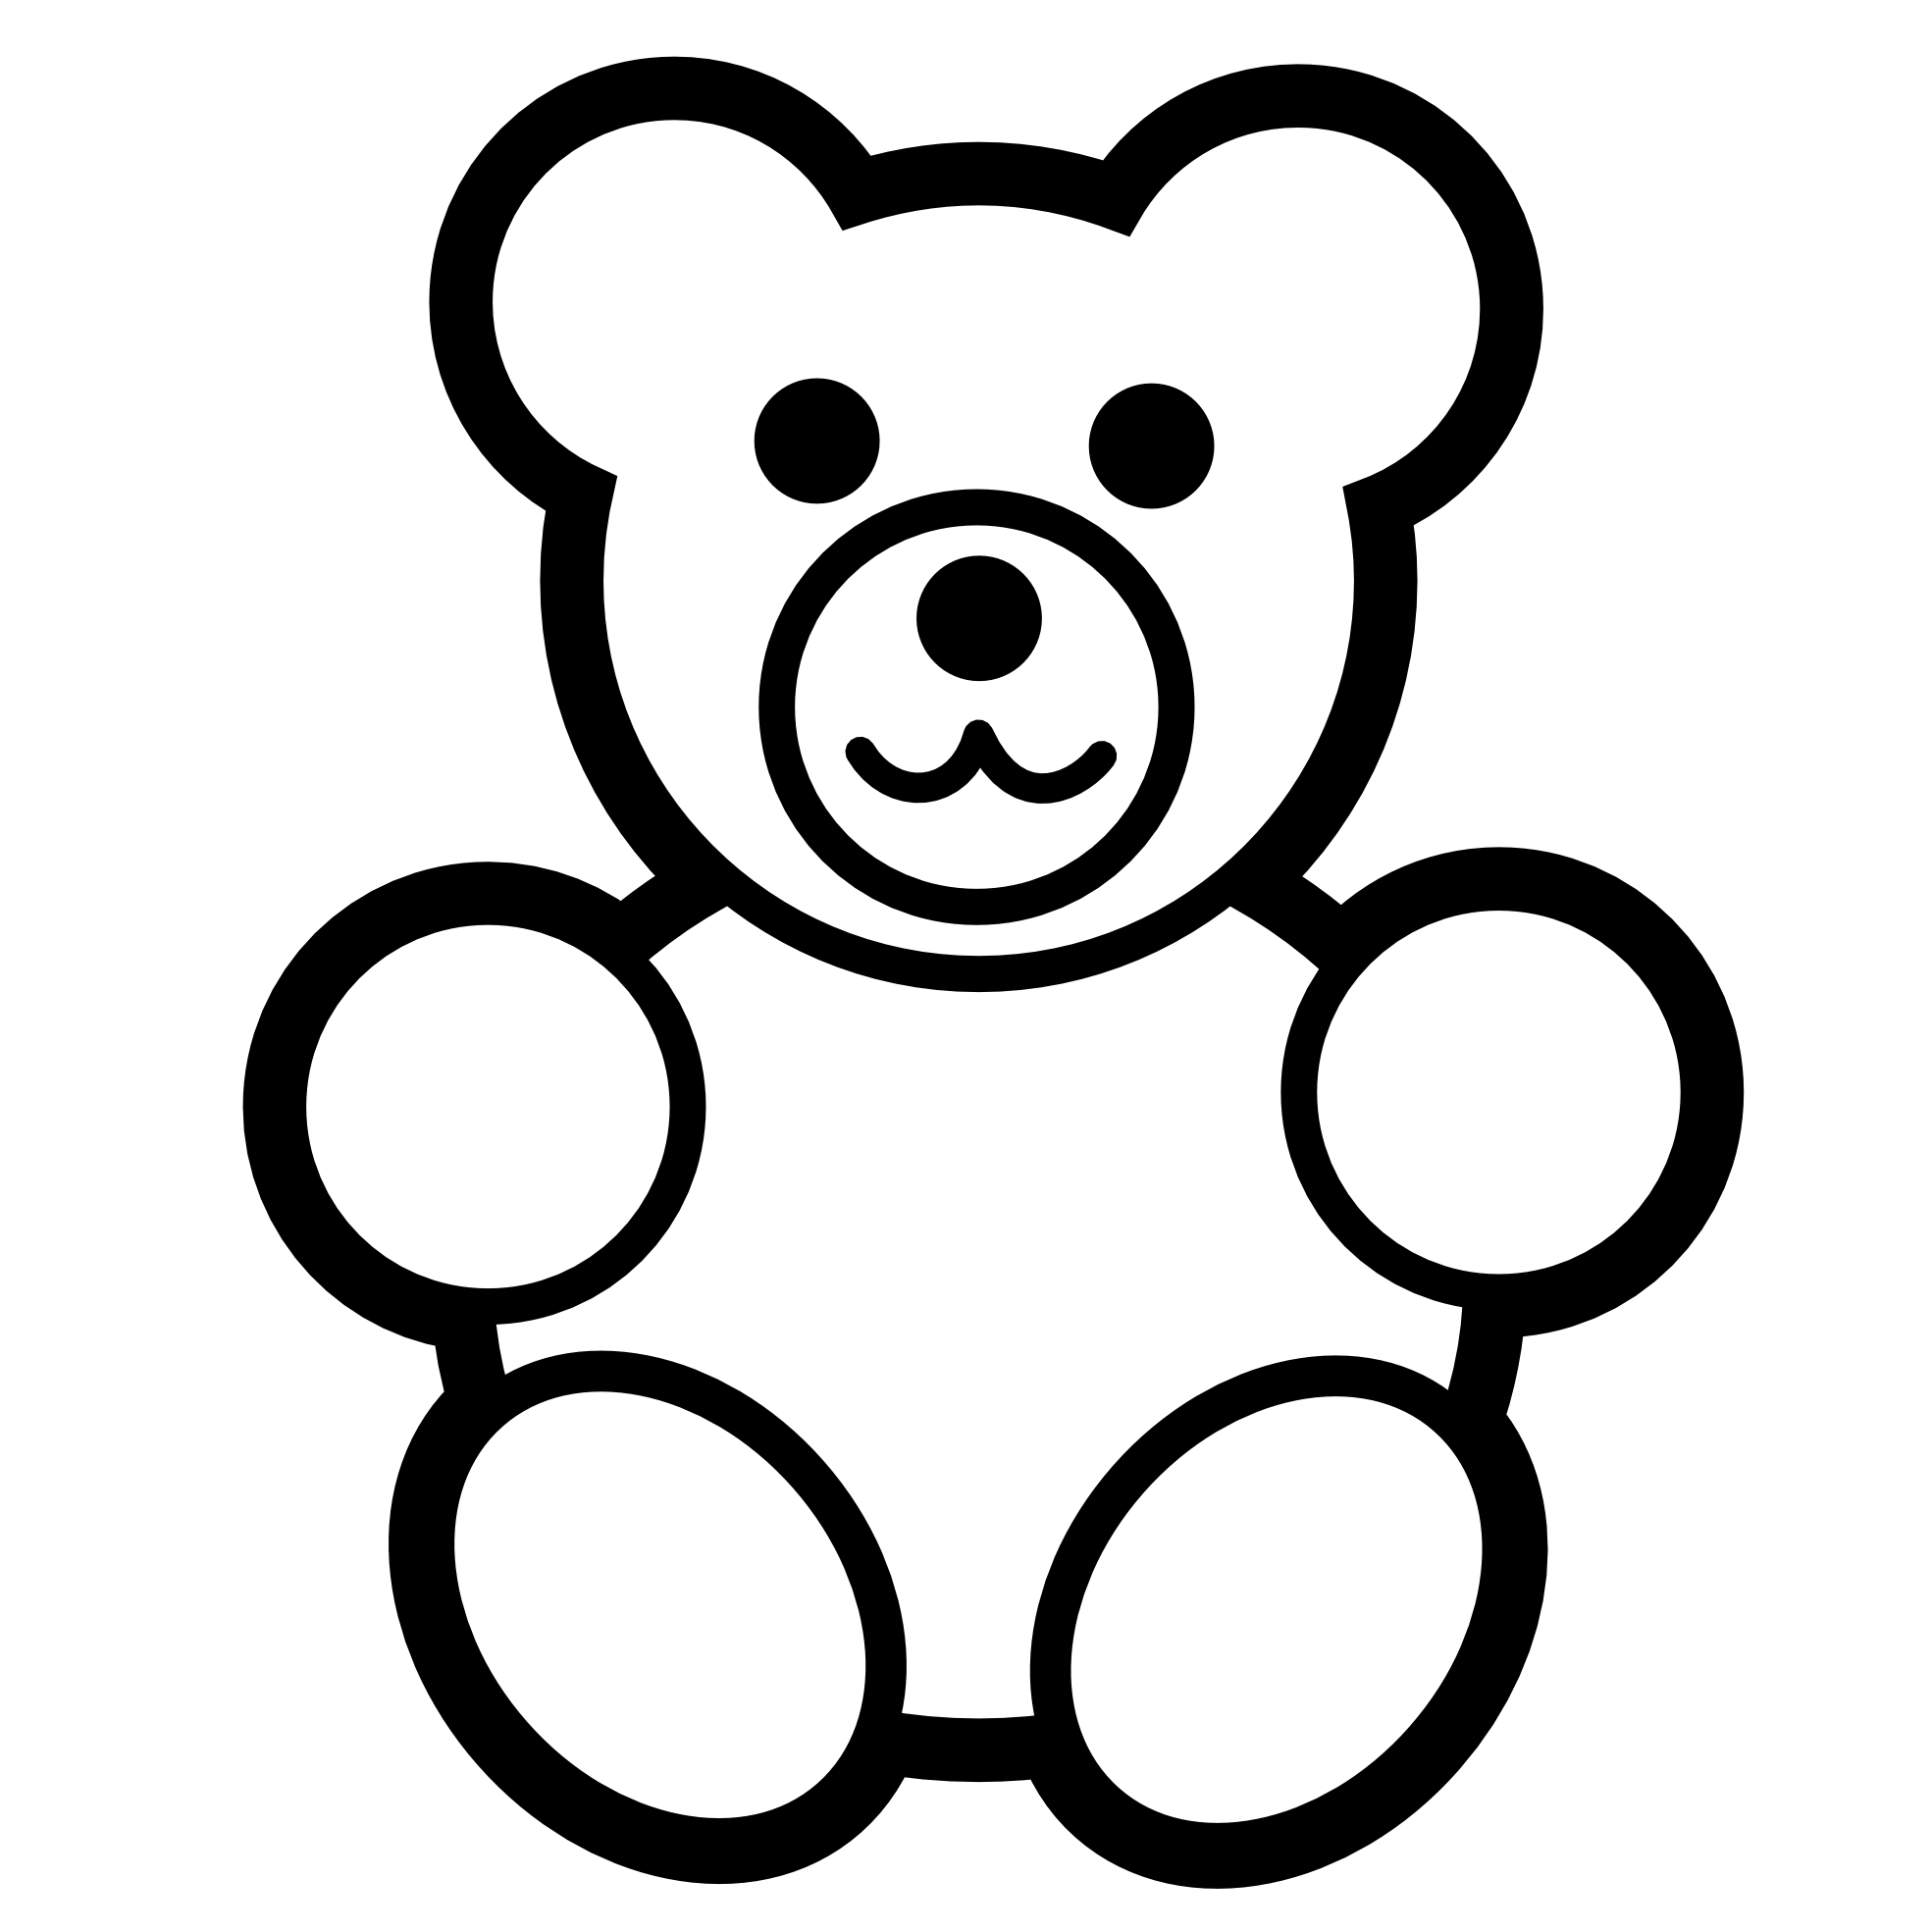 . Hdpng.com Dy Bear Icon Black White Line Art Christmas Xmas Teddy Bear Stuffed Animal Coloring Book Colouring 1969Px.png 167(K) Hdpng.com  - Teddy Bear Black And White, Transparent background PNG HD thumbnail